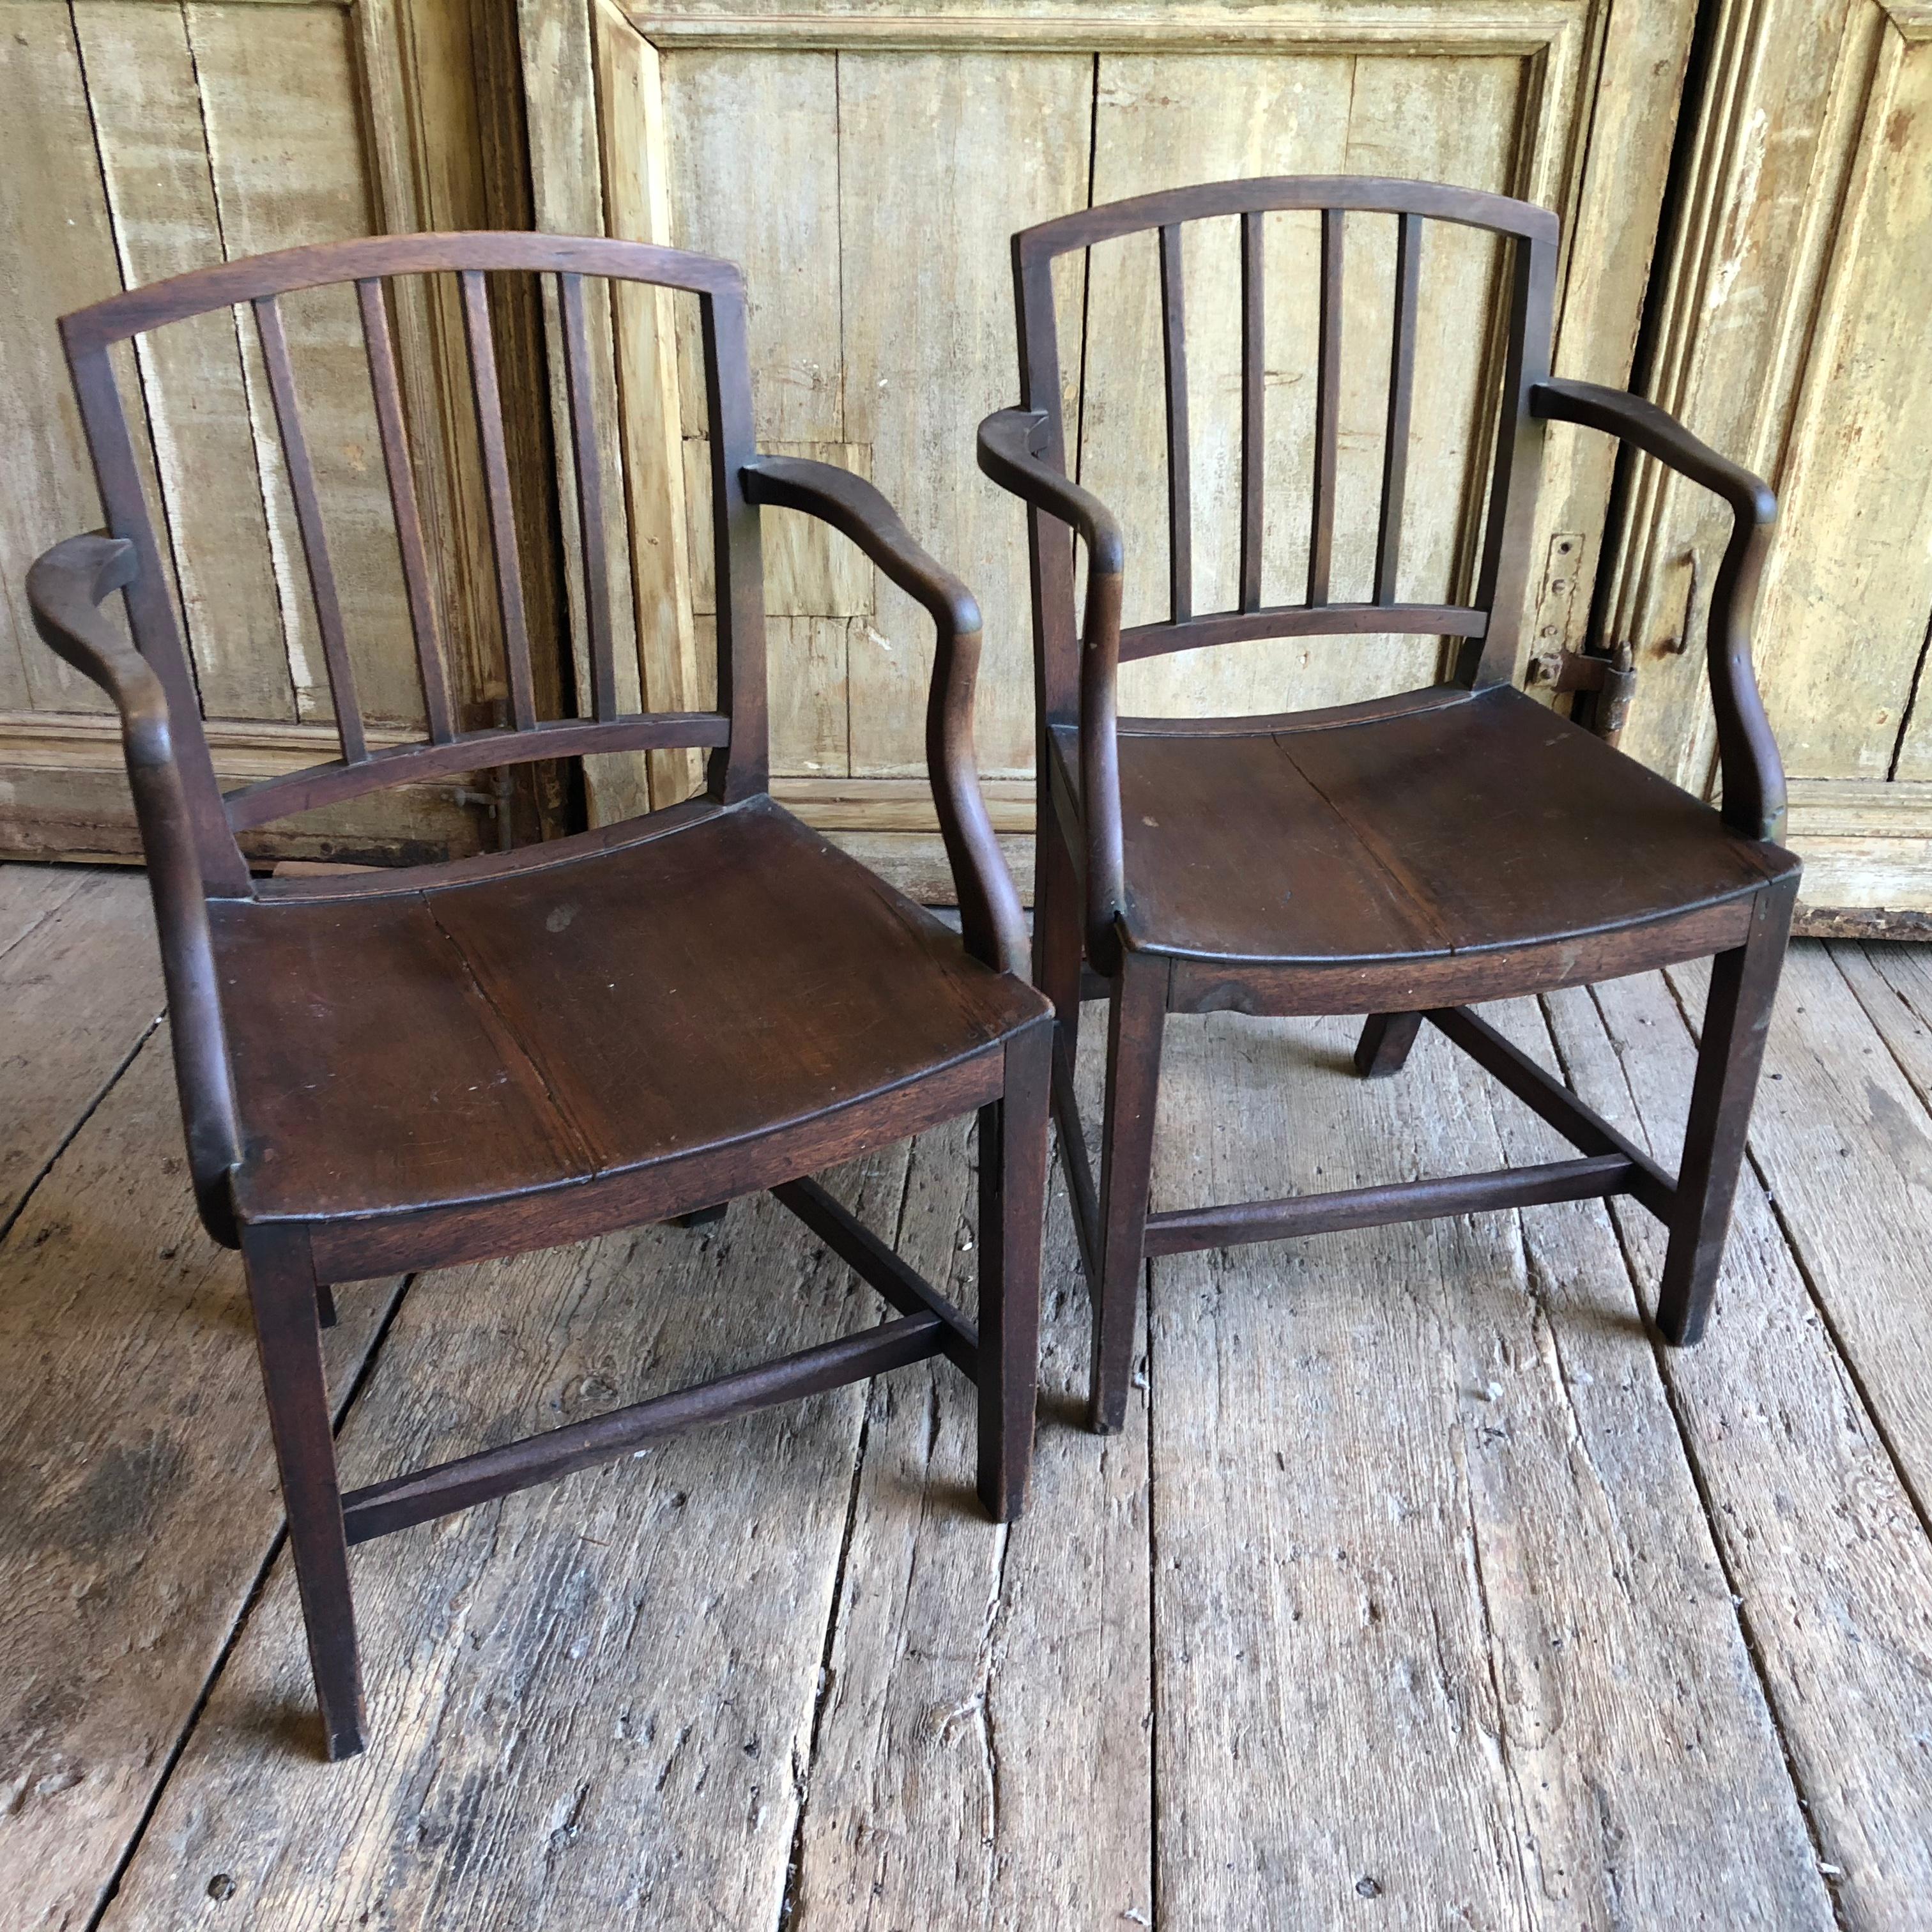 A pair of English Regency armchairs in mahogany with salt backs and slightly curved seats and bowed arms, circa 1830.